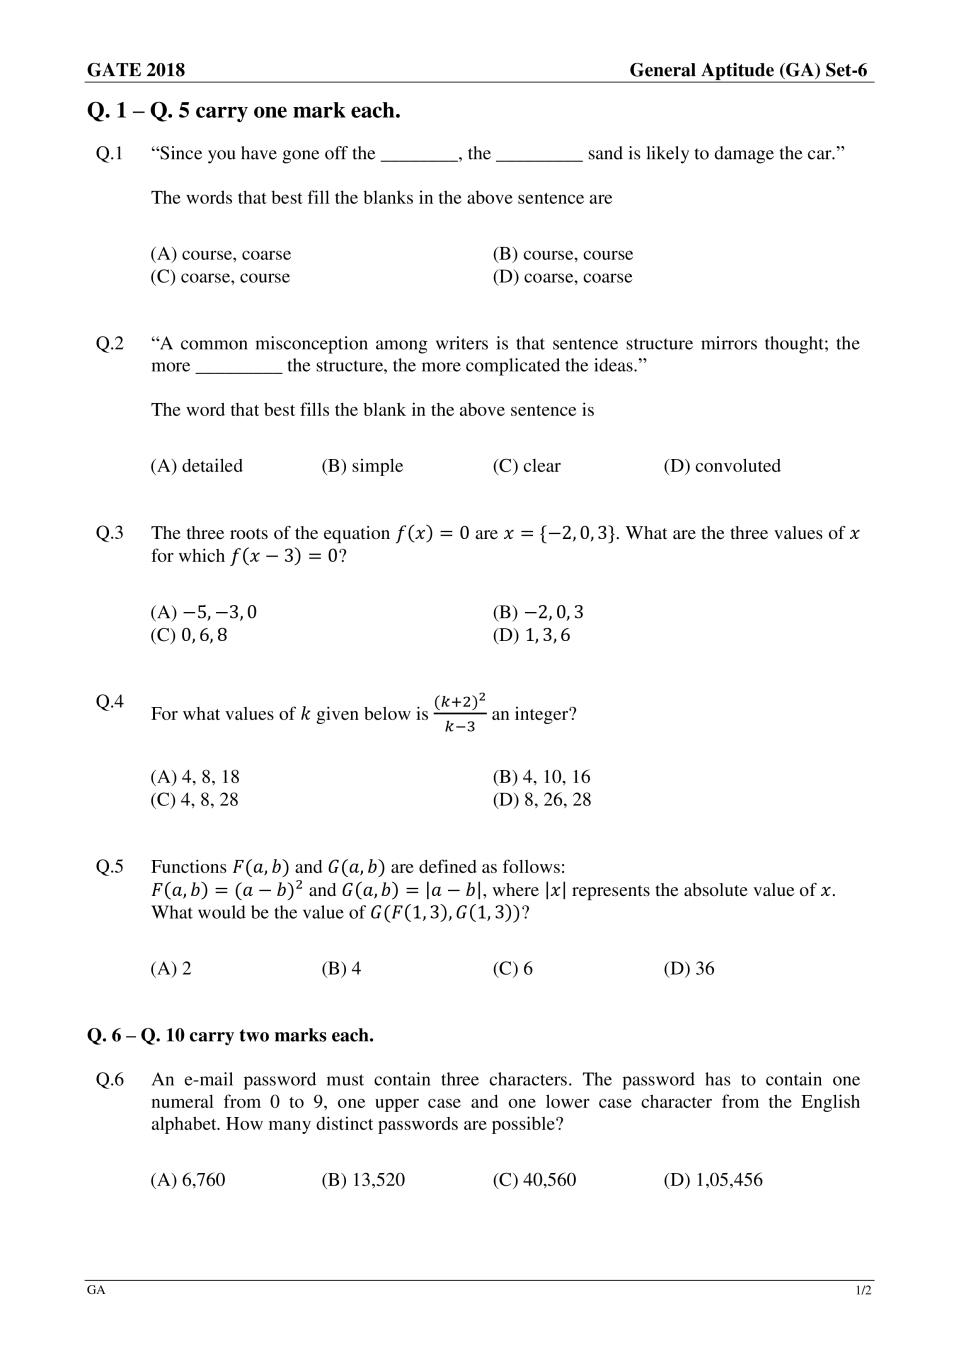 GATE 2018 Electrical Engineering (EE) Question Paper with Answer - Page 1